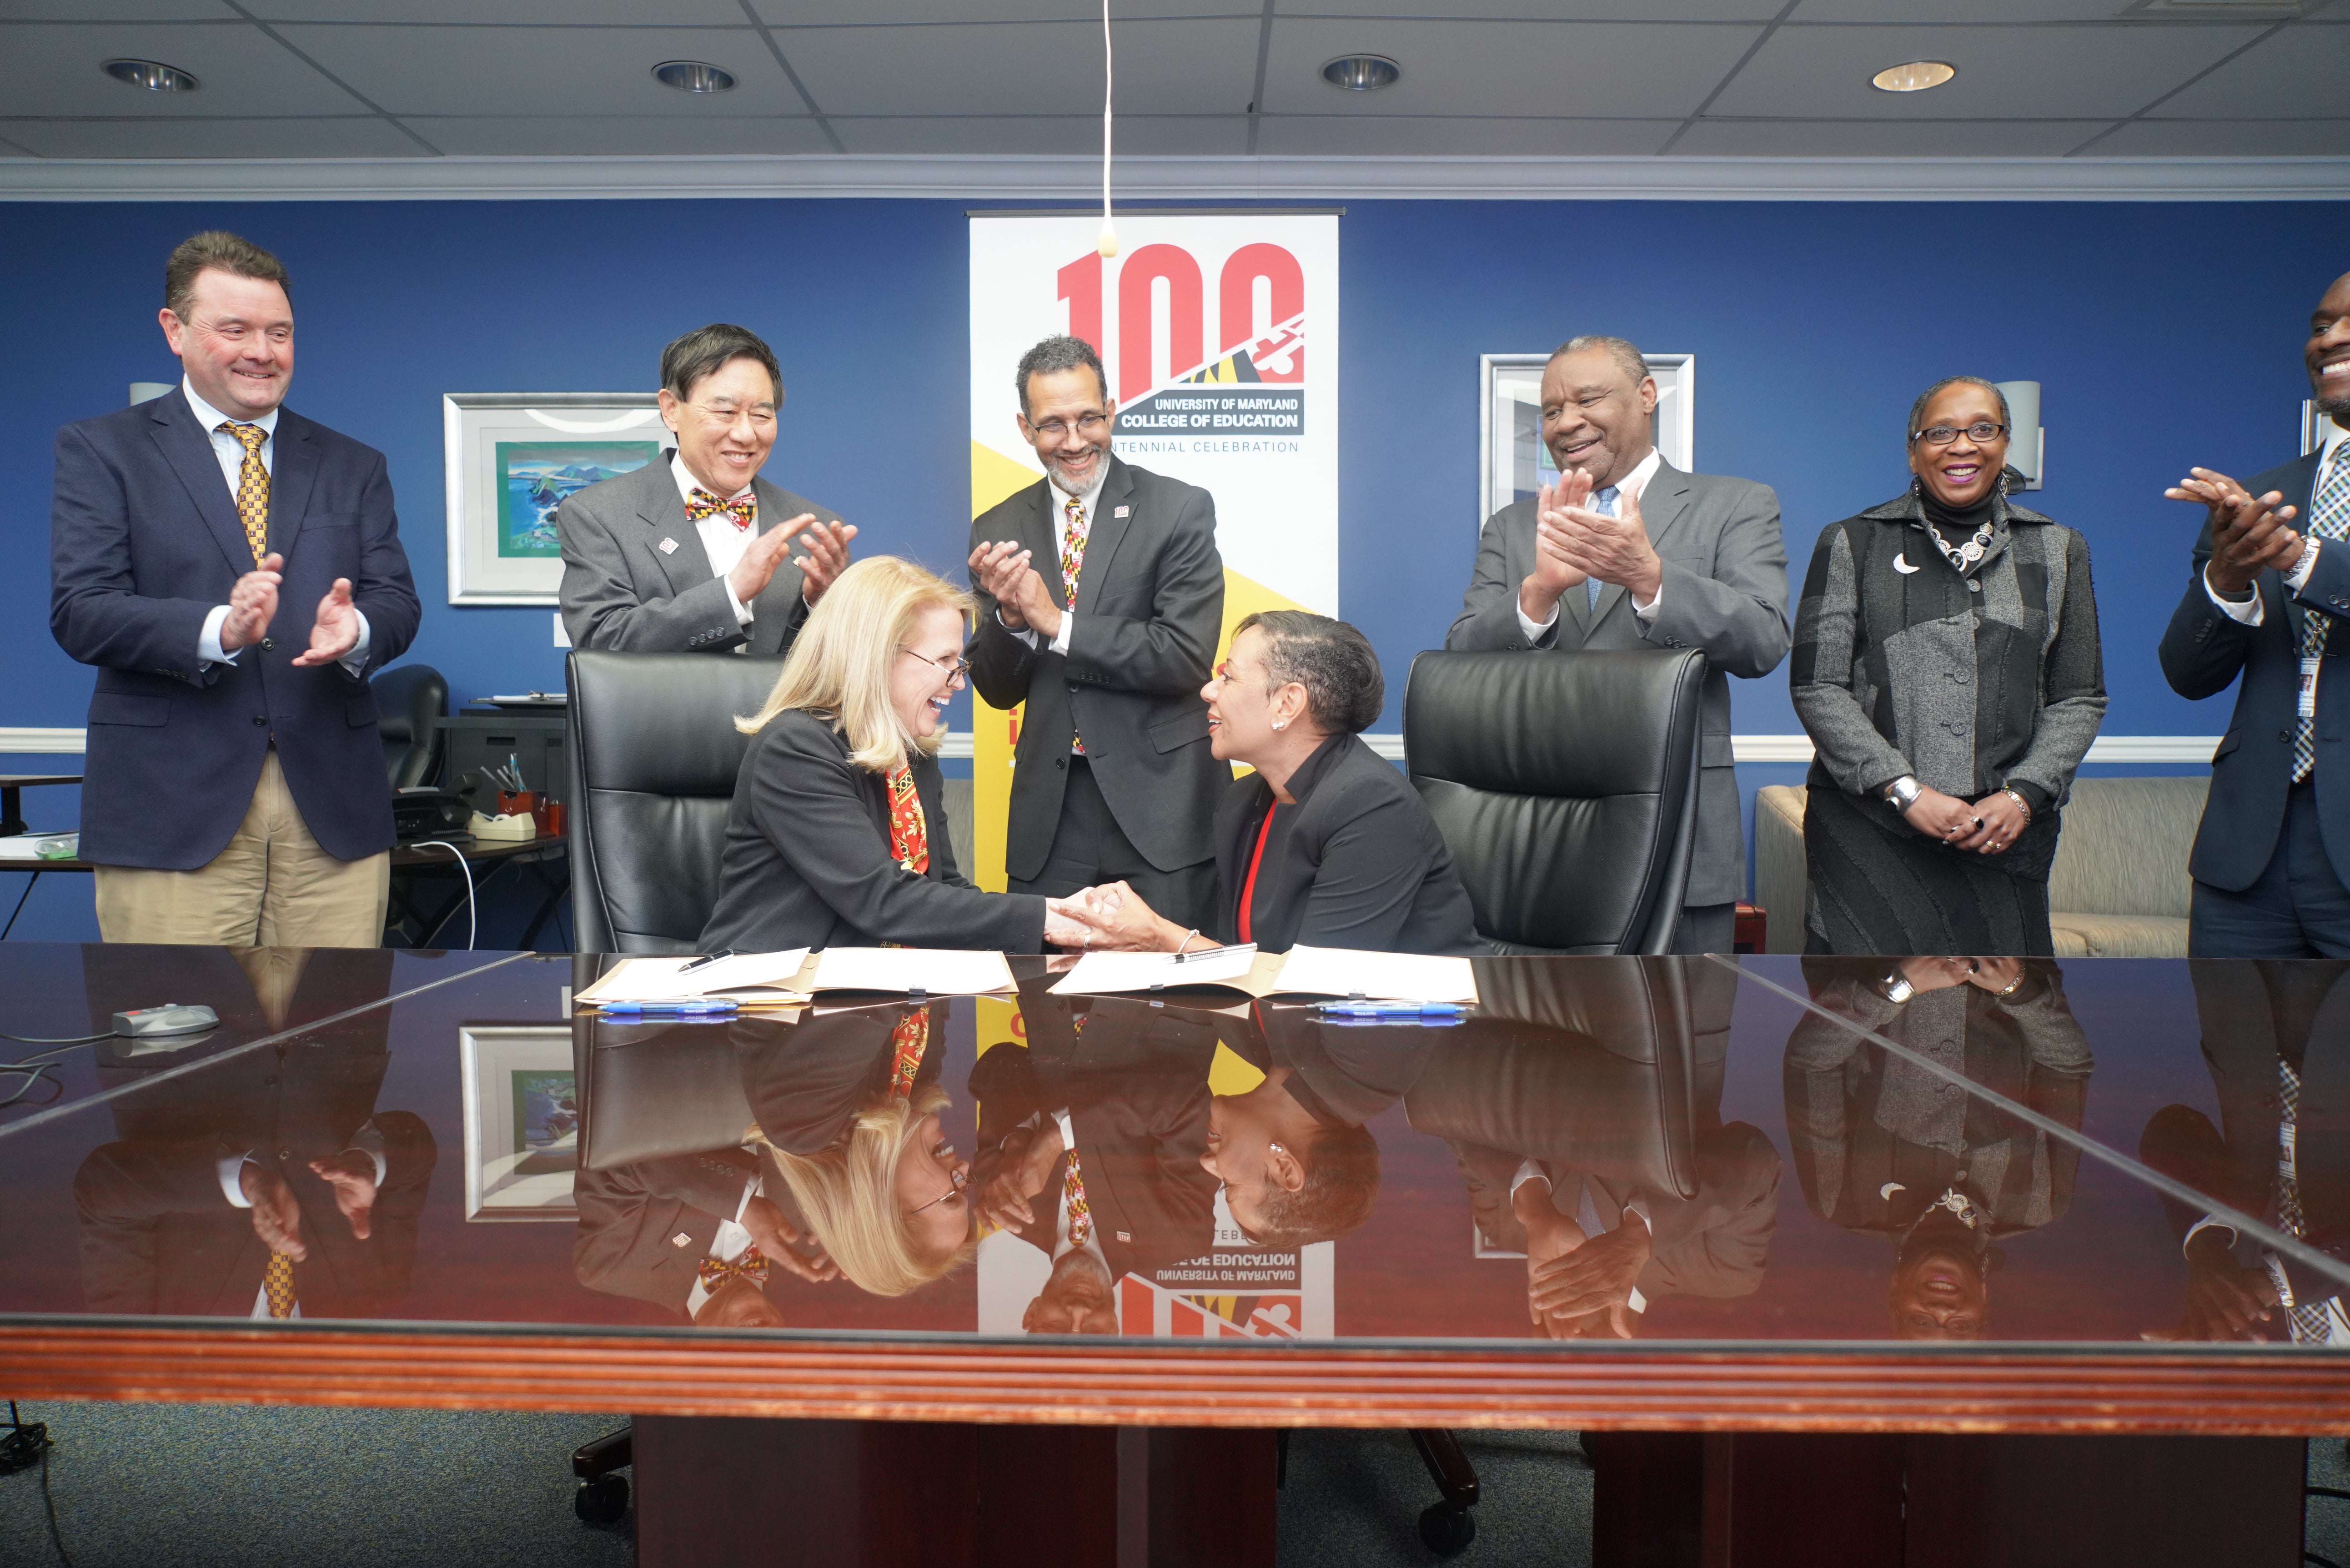 Dean Rice and PGCPS CEO Monica Goldstone shake hands at MOU signing